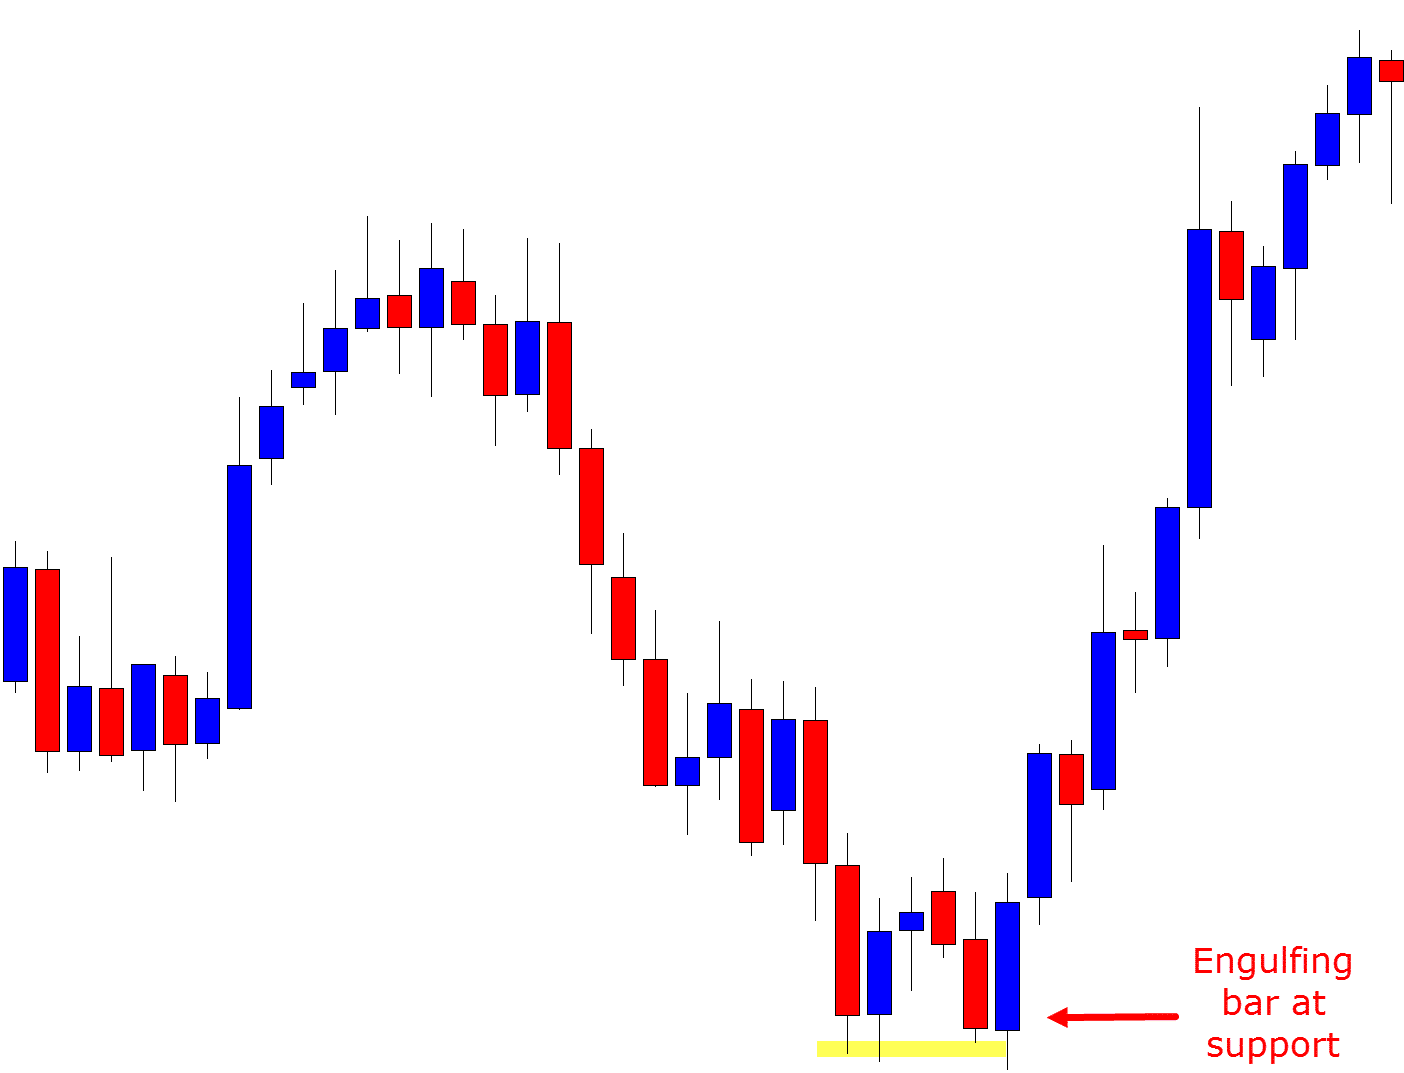 Engulfing bar at support